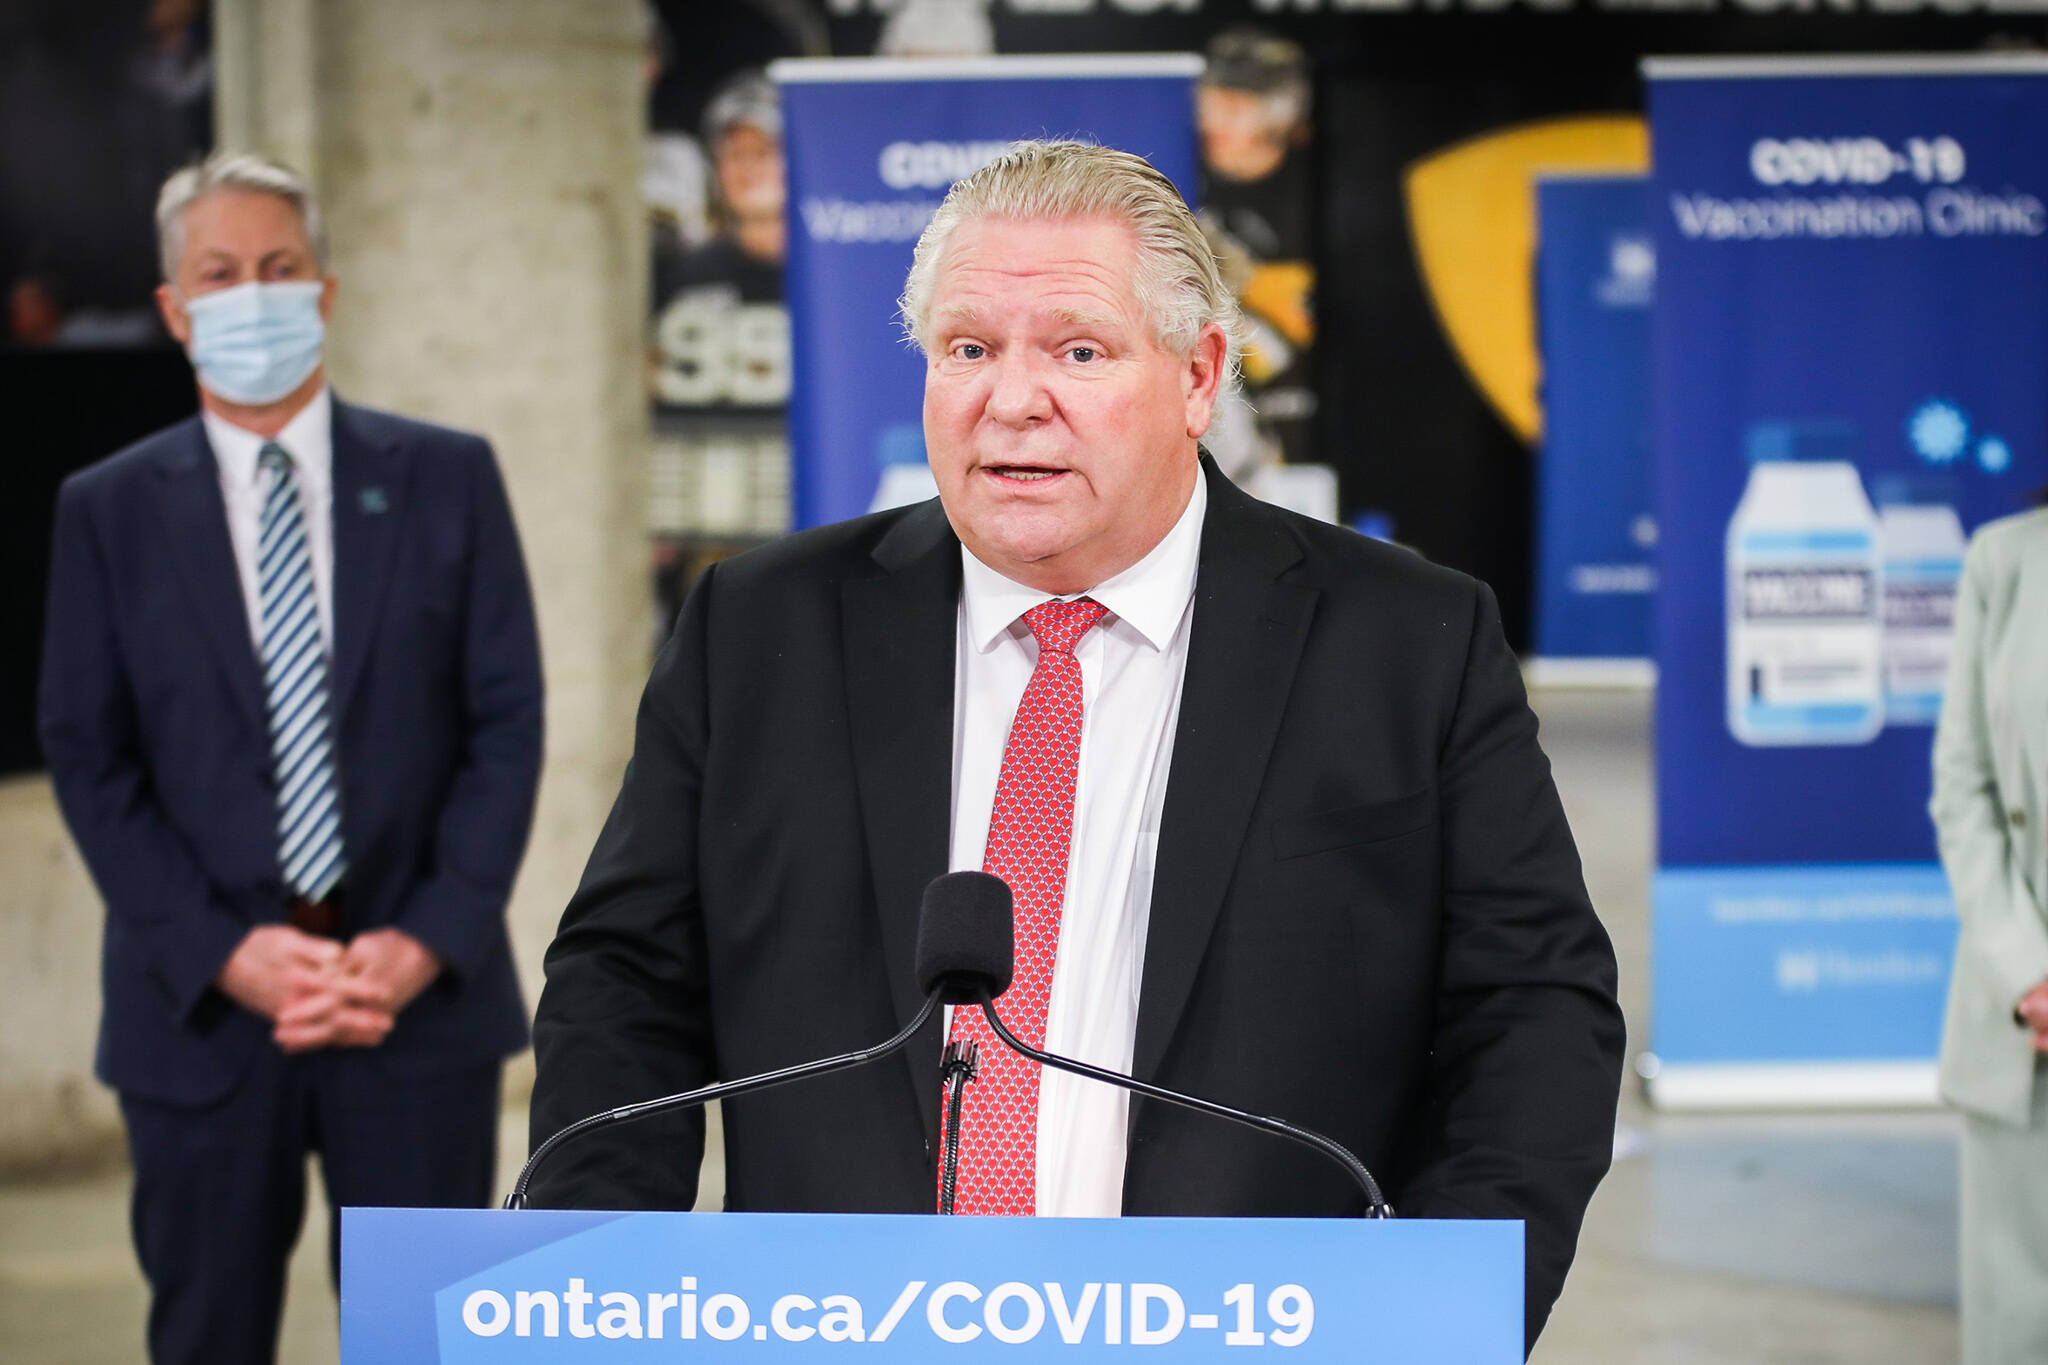 Doug Ford Announcement : Doug Ford keeps posting weird social media videos at ... / Premier of ontario • leader of the ontario pc party • for the people